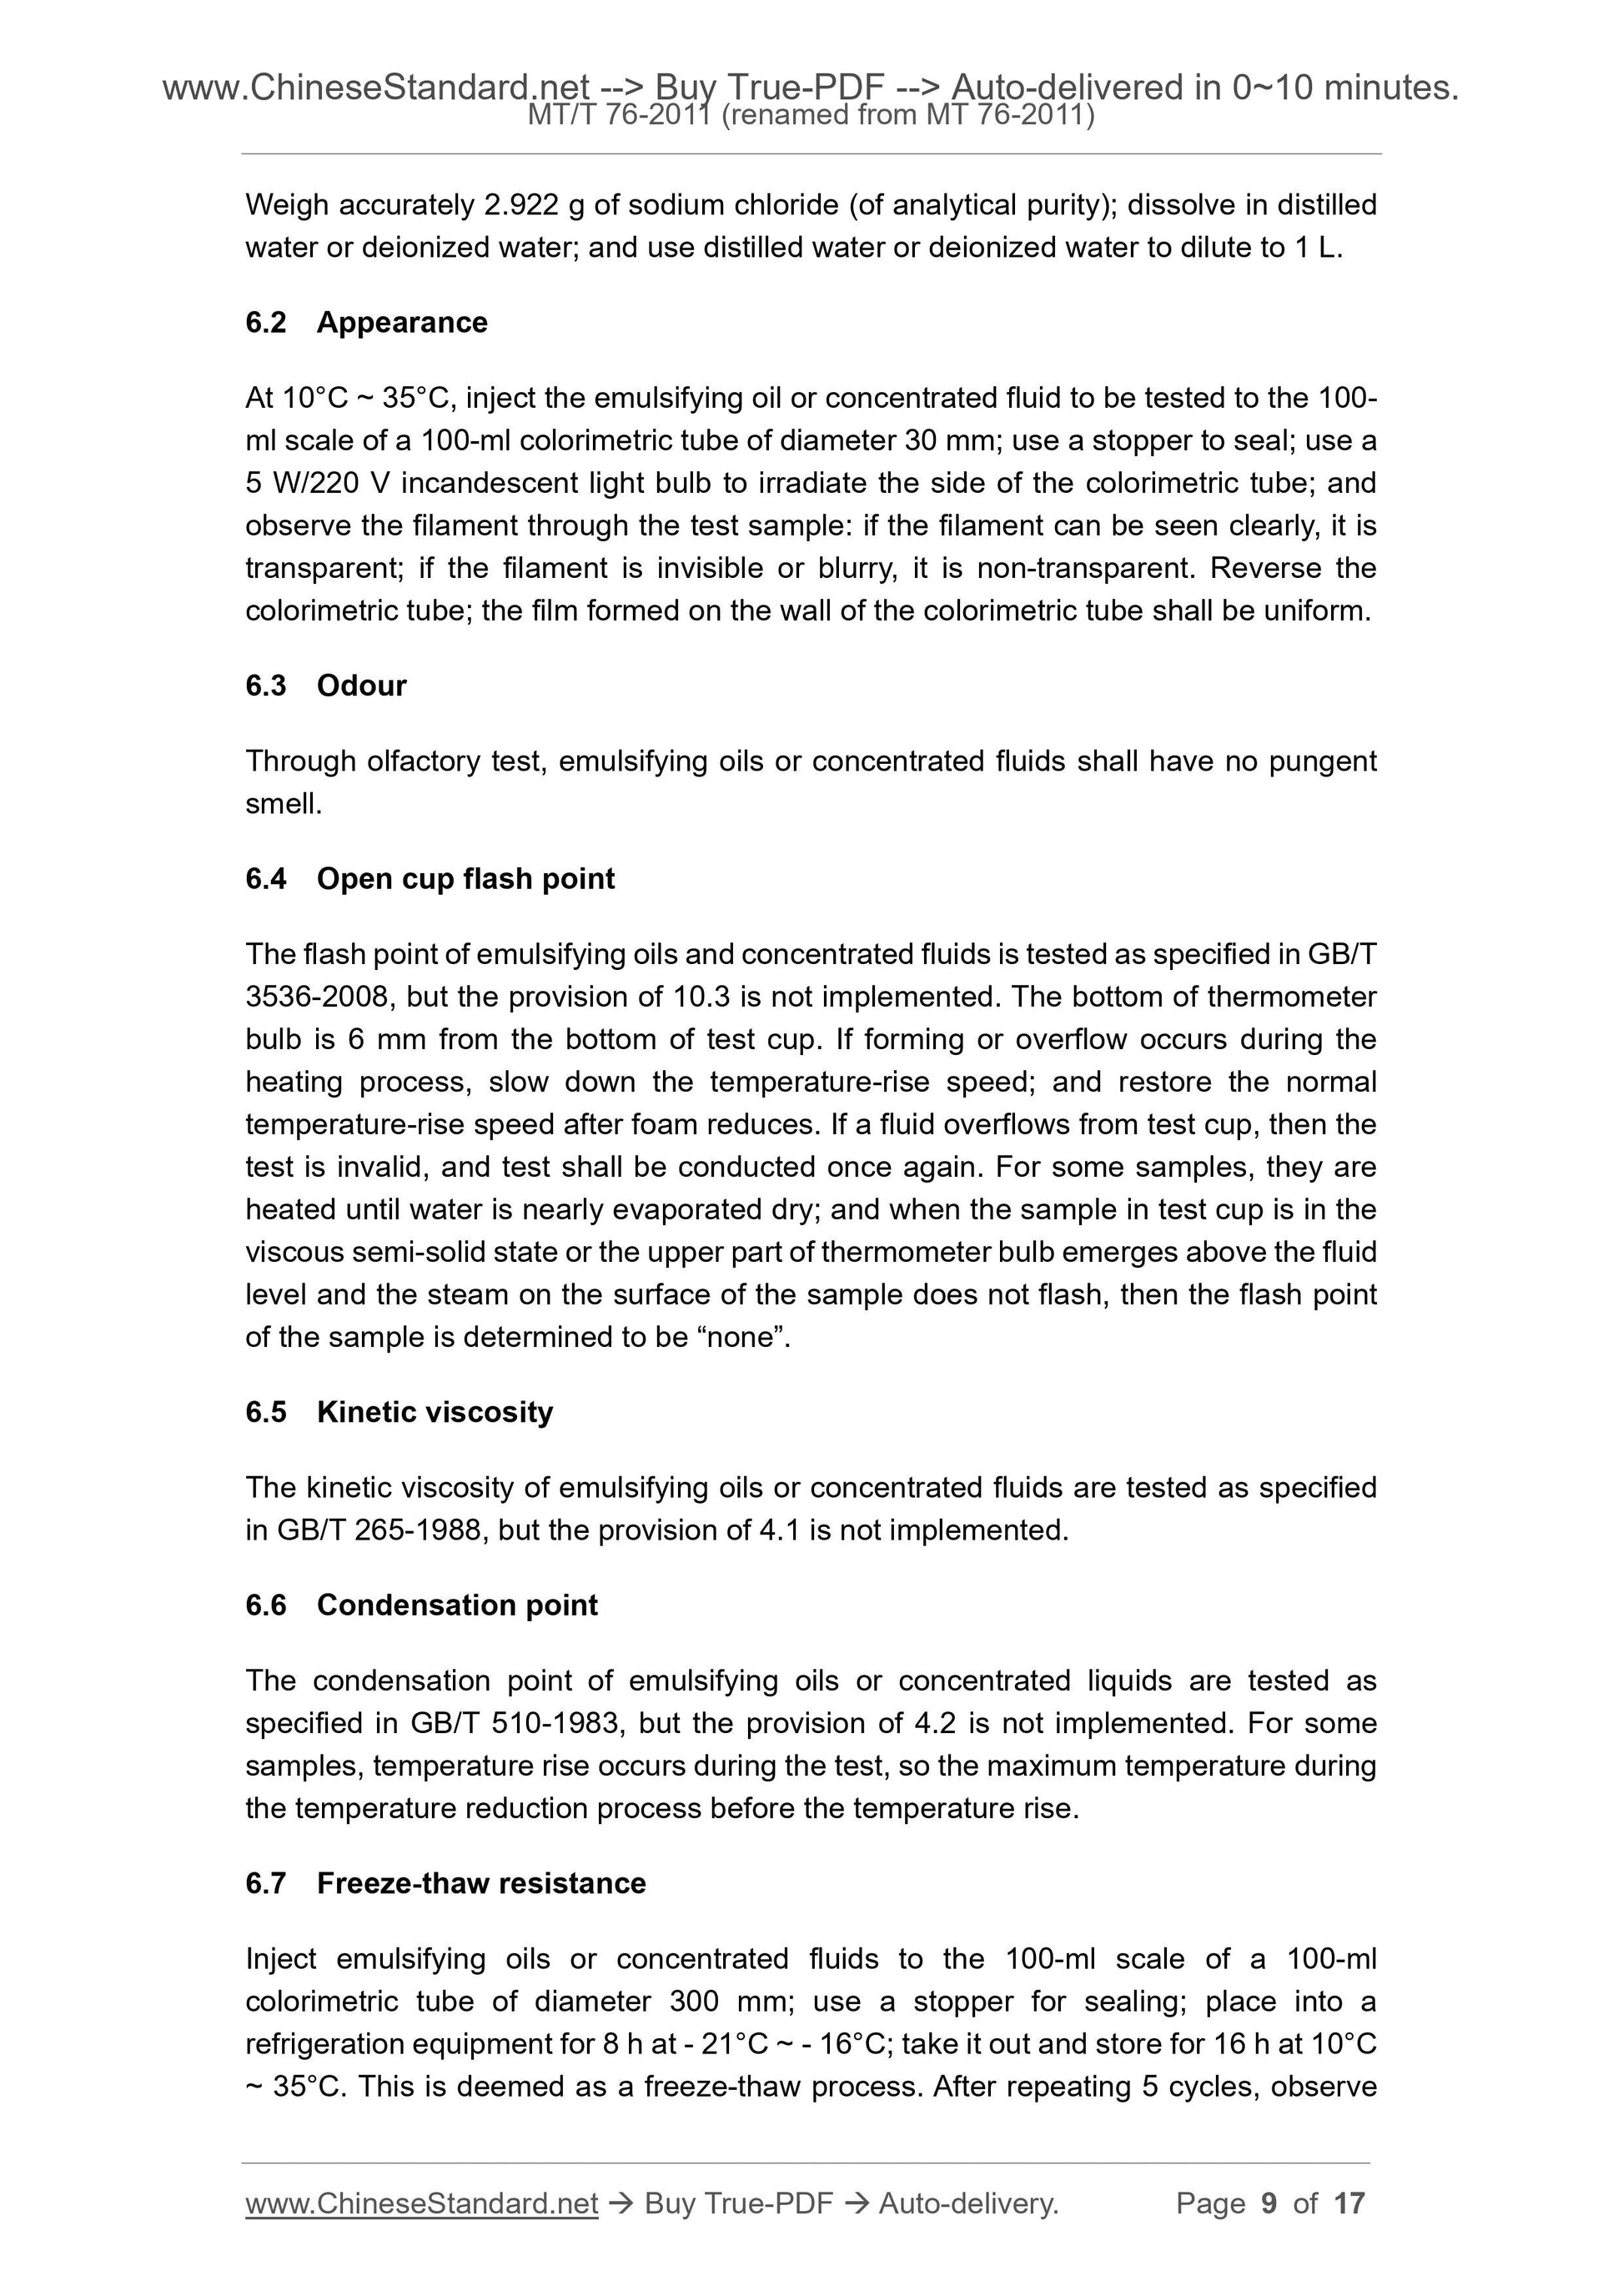 MT 76-2011 Page 5